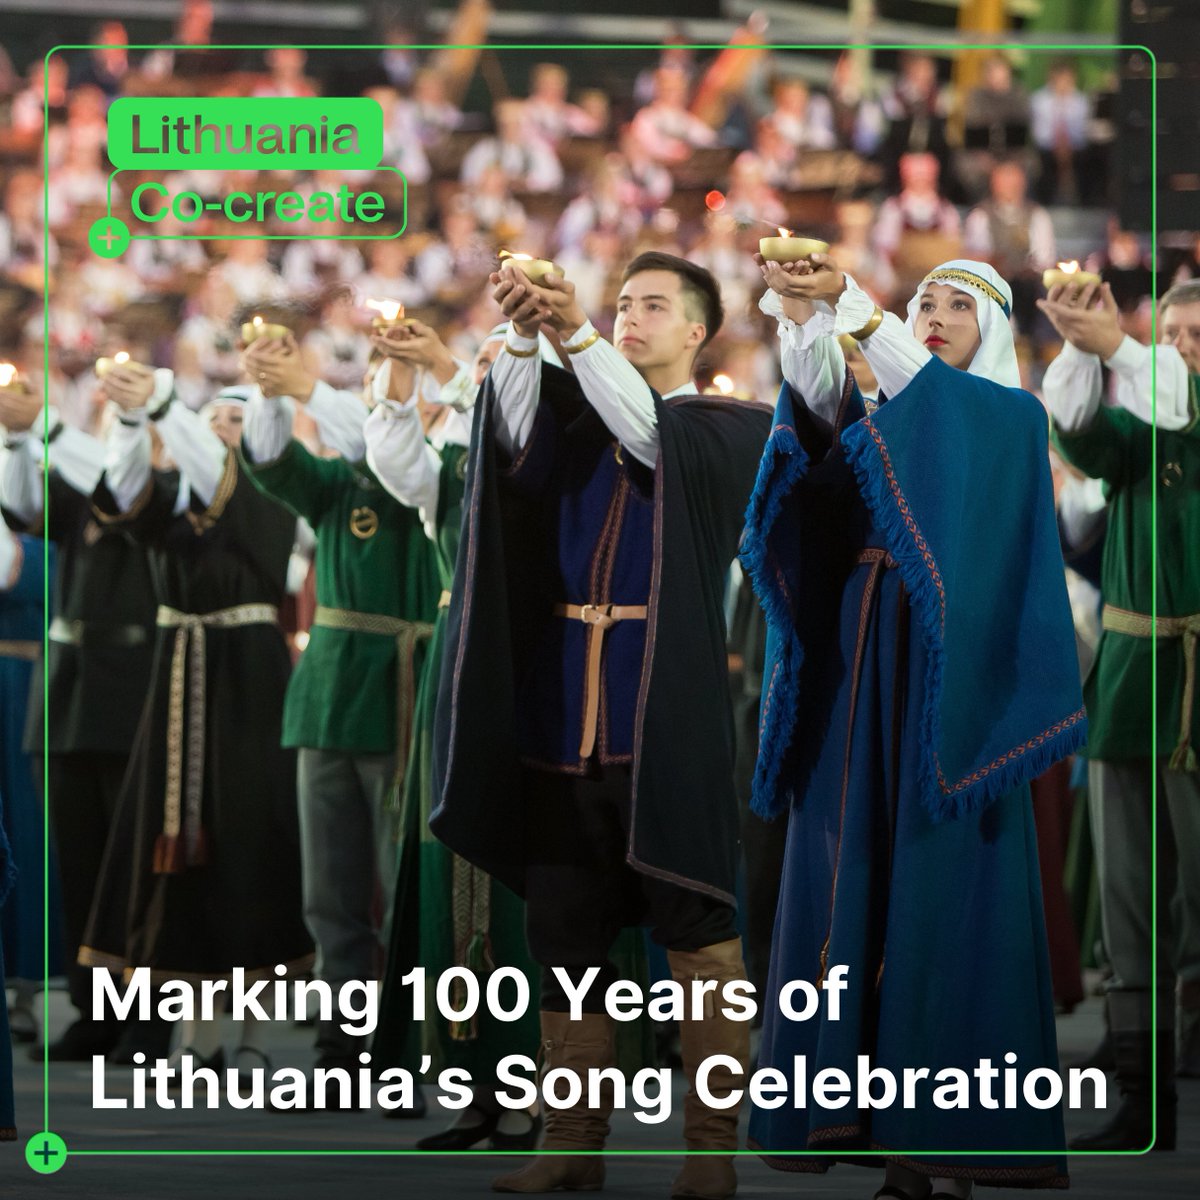 100 years of harmonious heritage! 🎉 Lithuania proudly marks the centenary of its iconic Song Celebration in 2024. Here's to a century of cultural resonance and unity through music! 🎶 #Lithuania #SongCelebration #Centenary